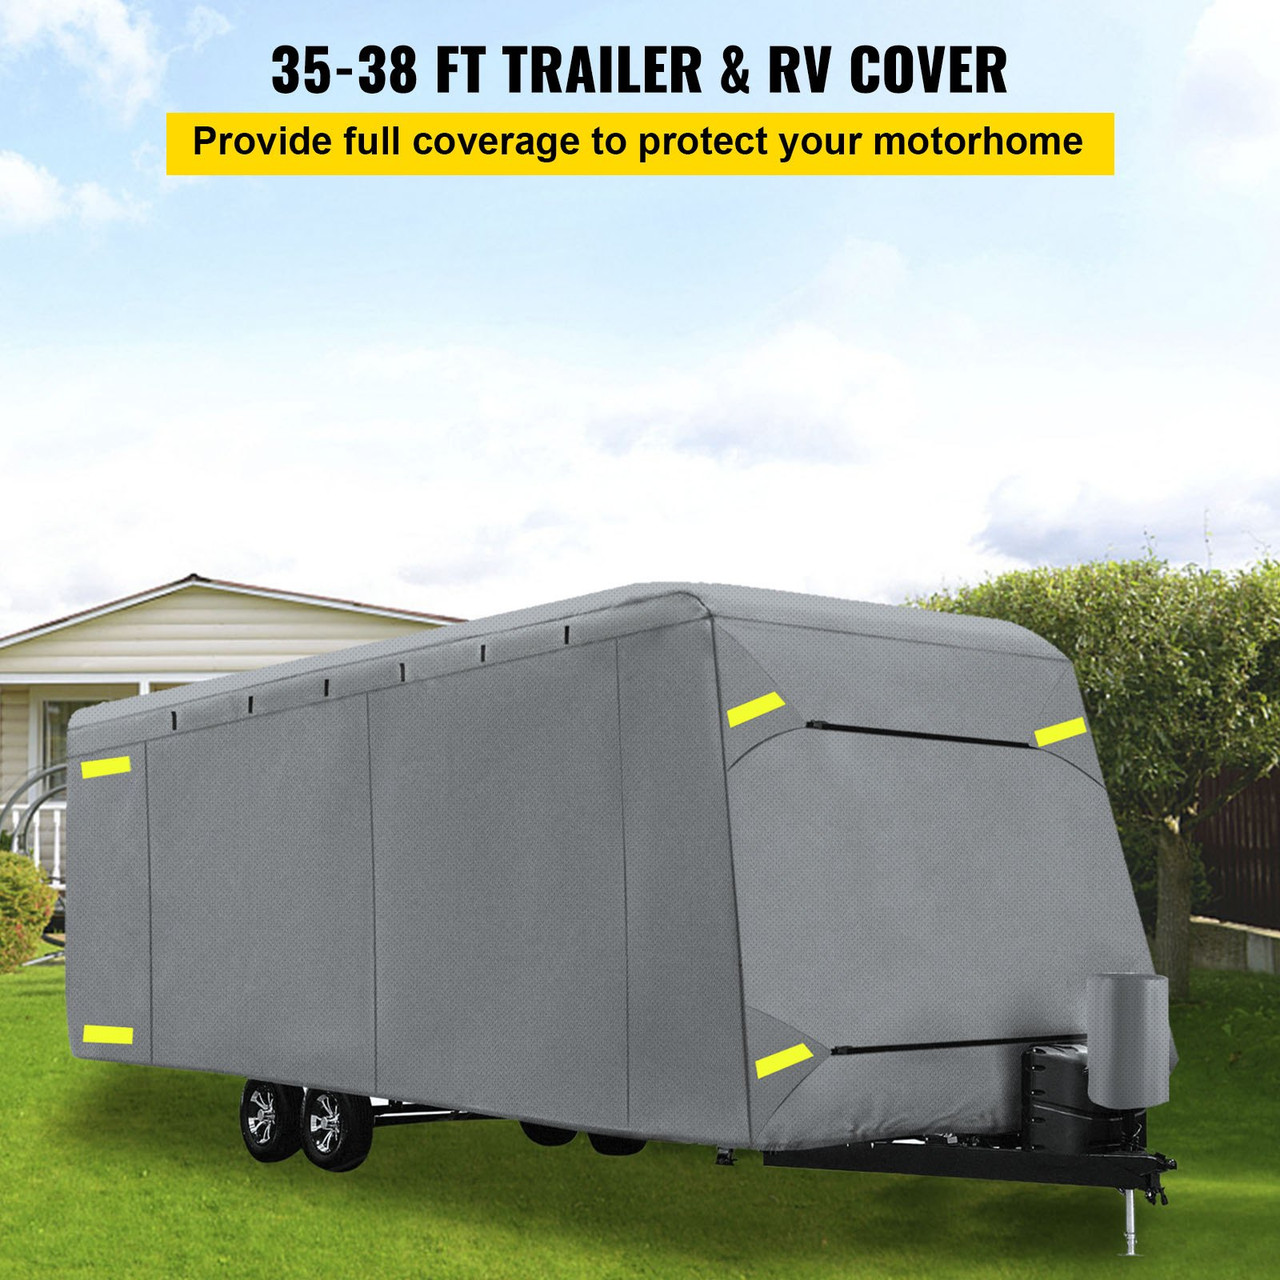 RV Cover, 35'-38' Travel Trailer RV Cover, Windproof RV & Trailer Cover, Extra-Thick 4 Layers Durable Camper Cover, Waterproof Ripstop Anti-UV for RV Motorhome with Adhesive Patch & Storage Bag